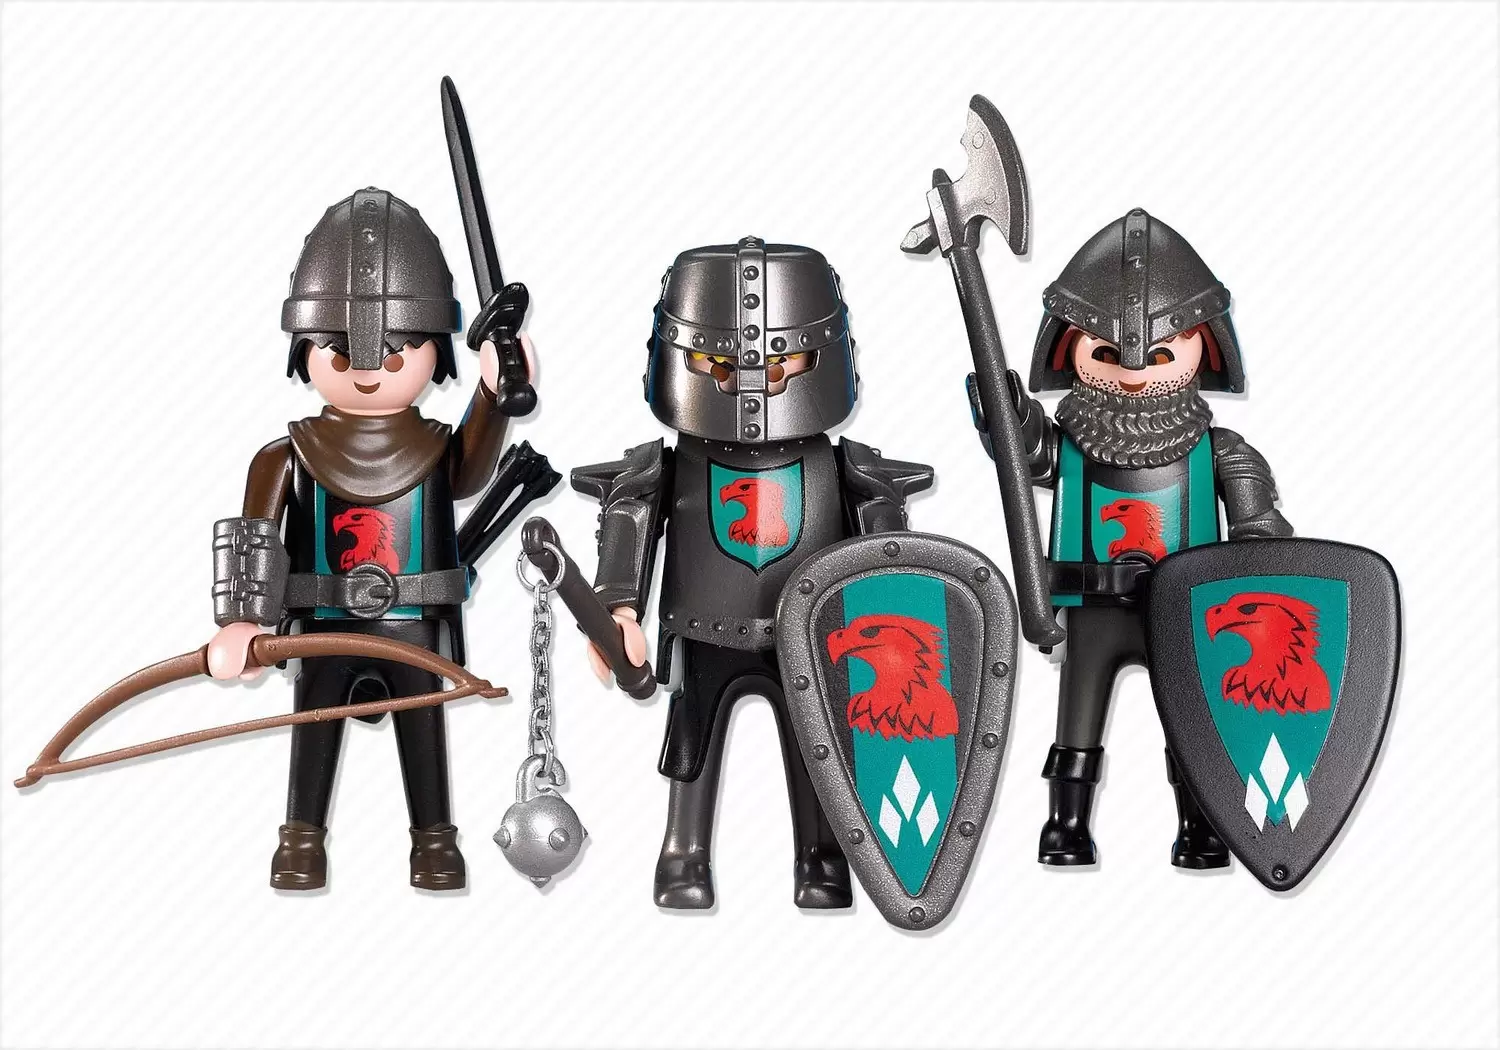 3 Knights - Middle-Ages 7537